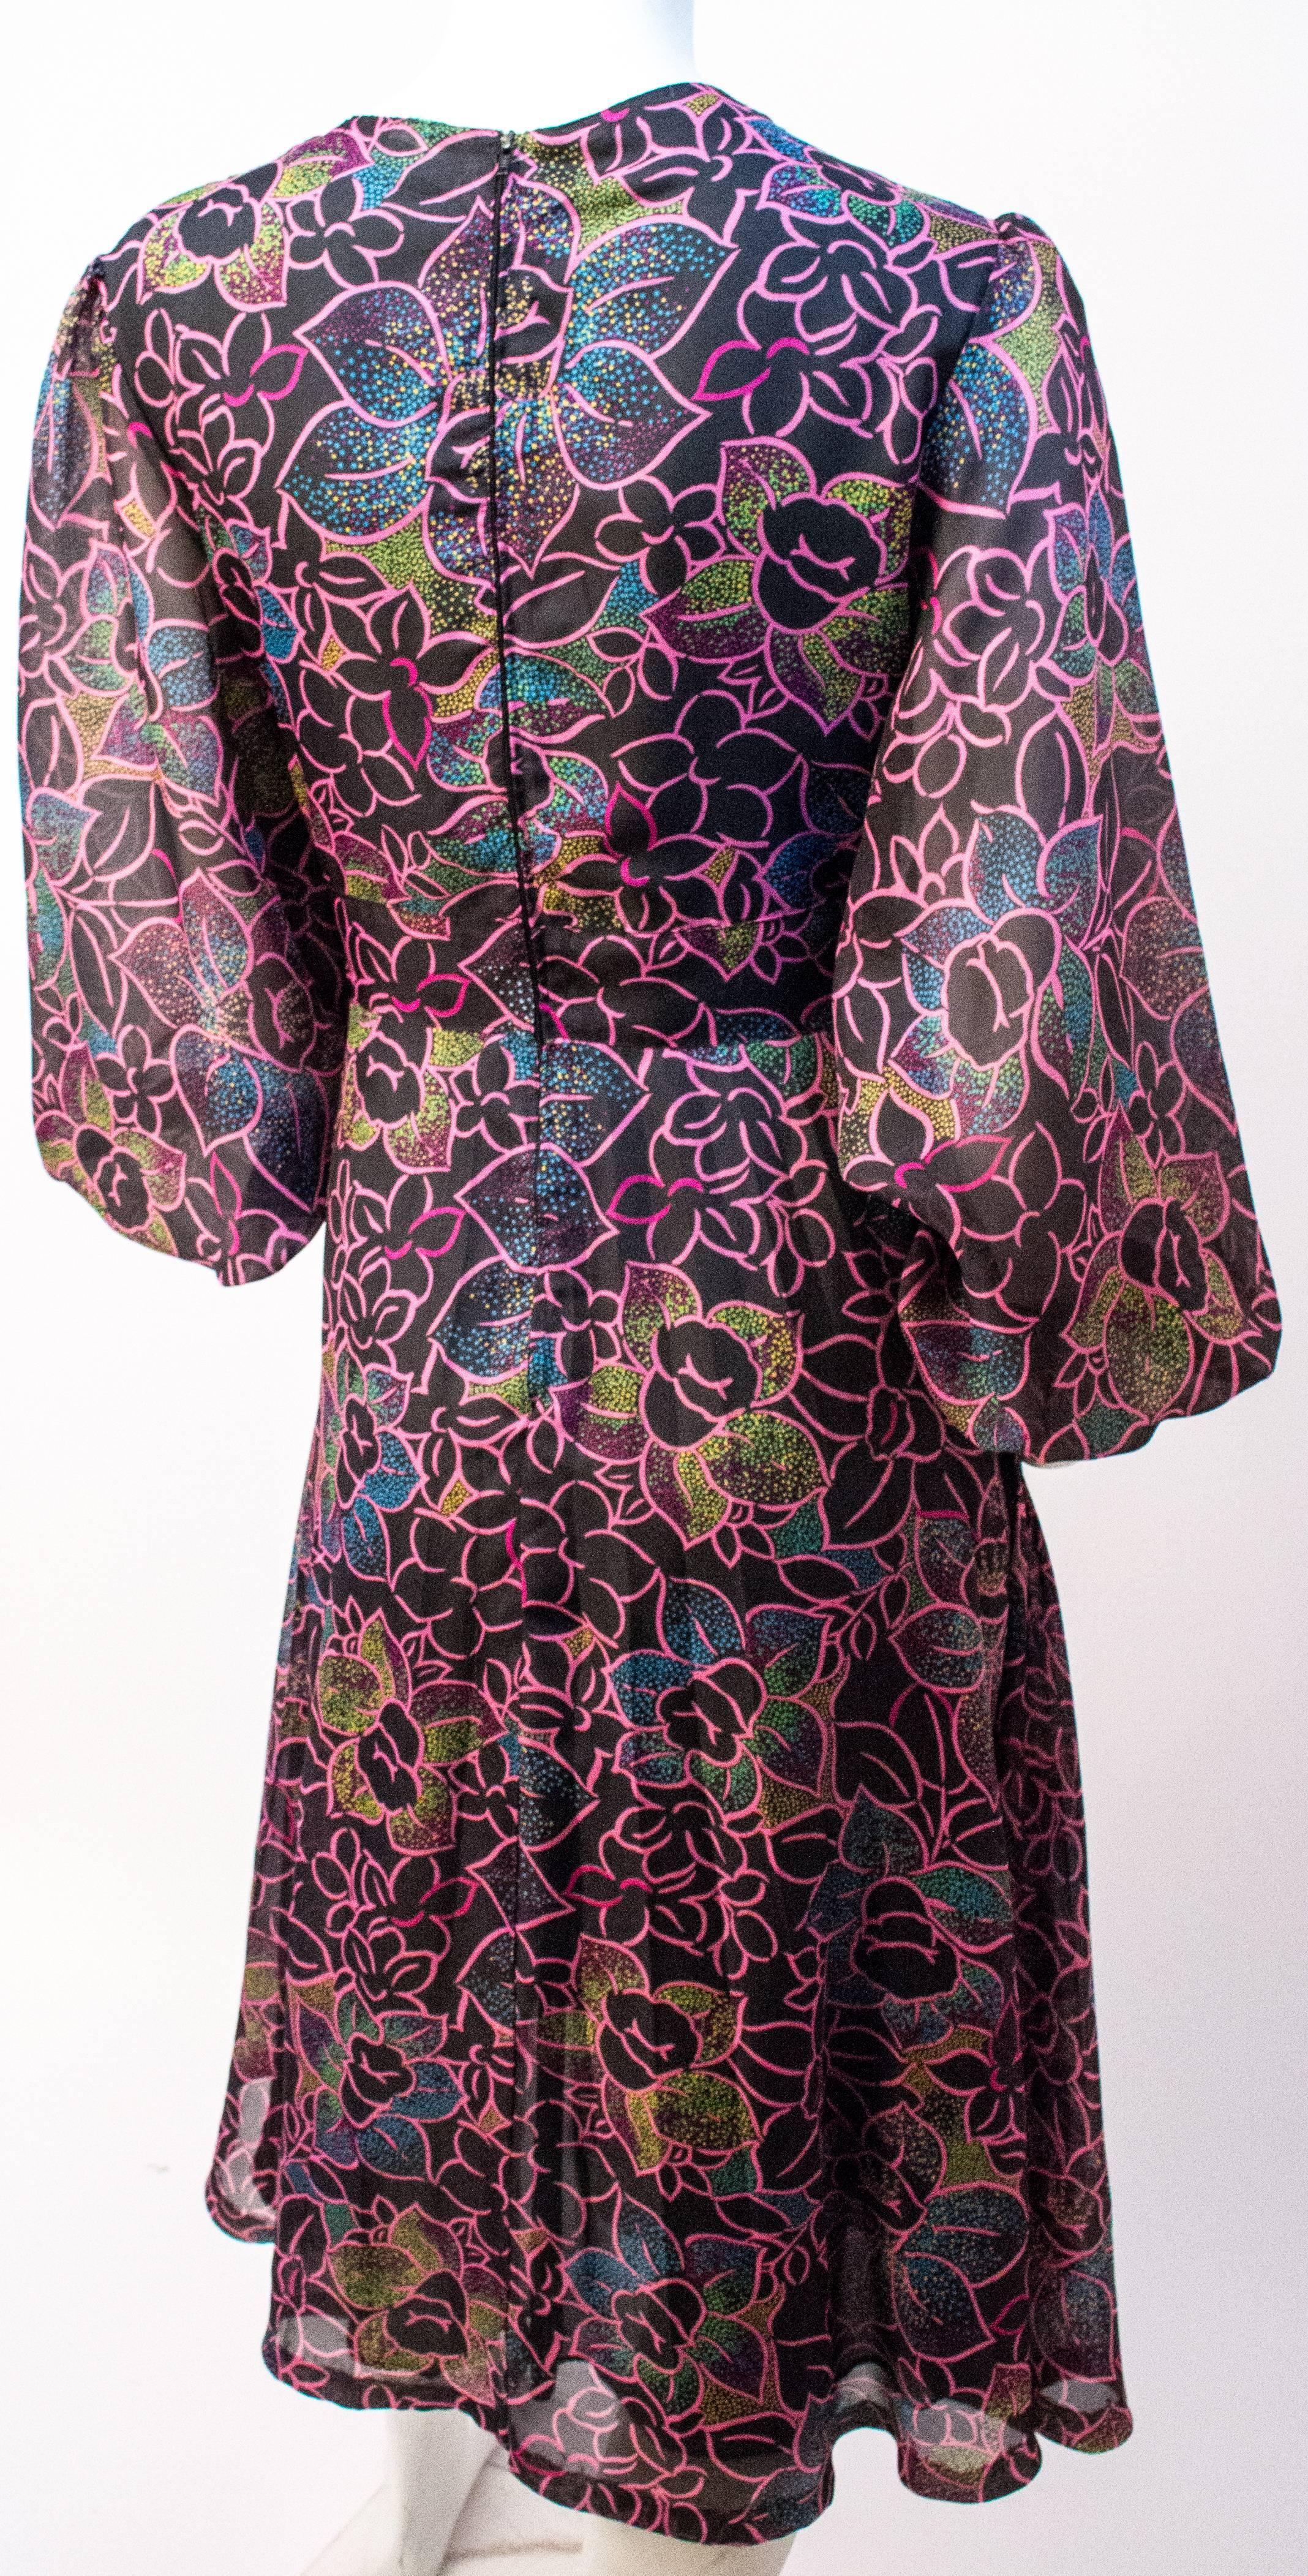 70s Floral Printed Chiffon Dress. Lined in synthetic black mesh. Back zip closure. 